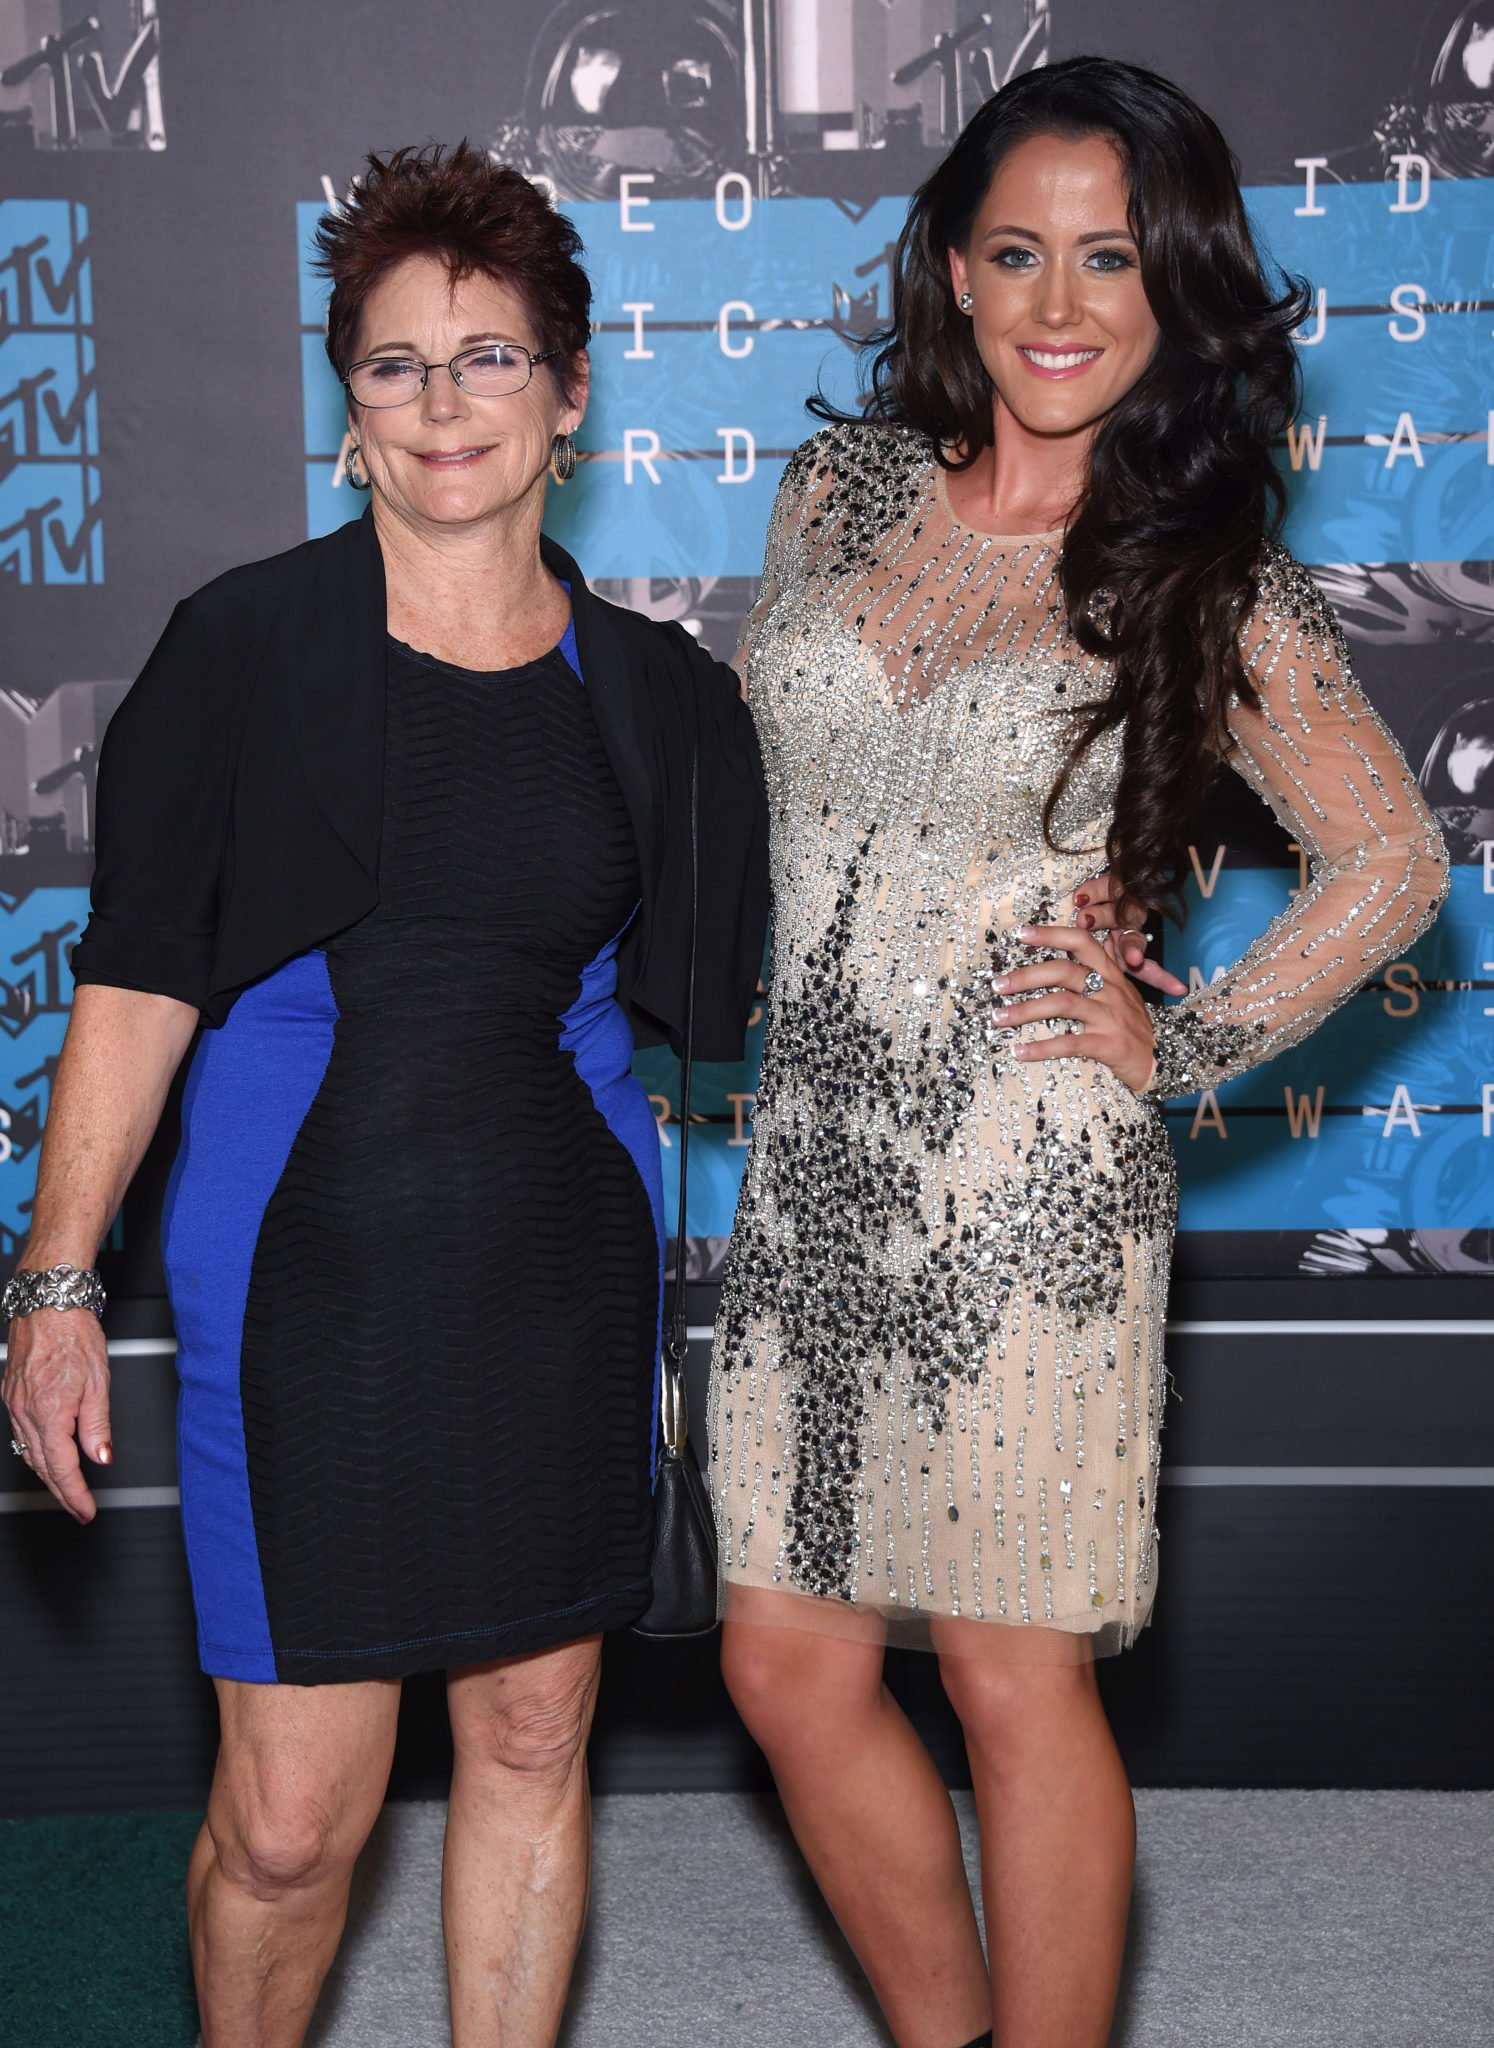 Jenelle and Barbara Evans pose